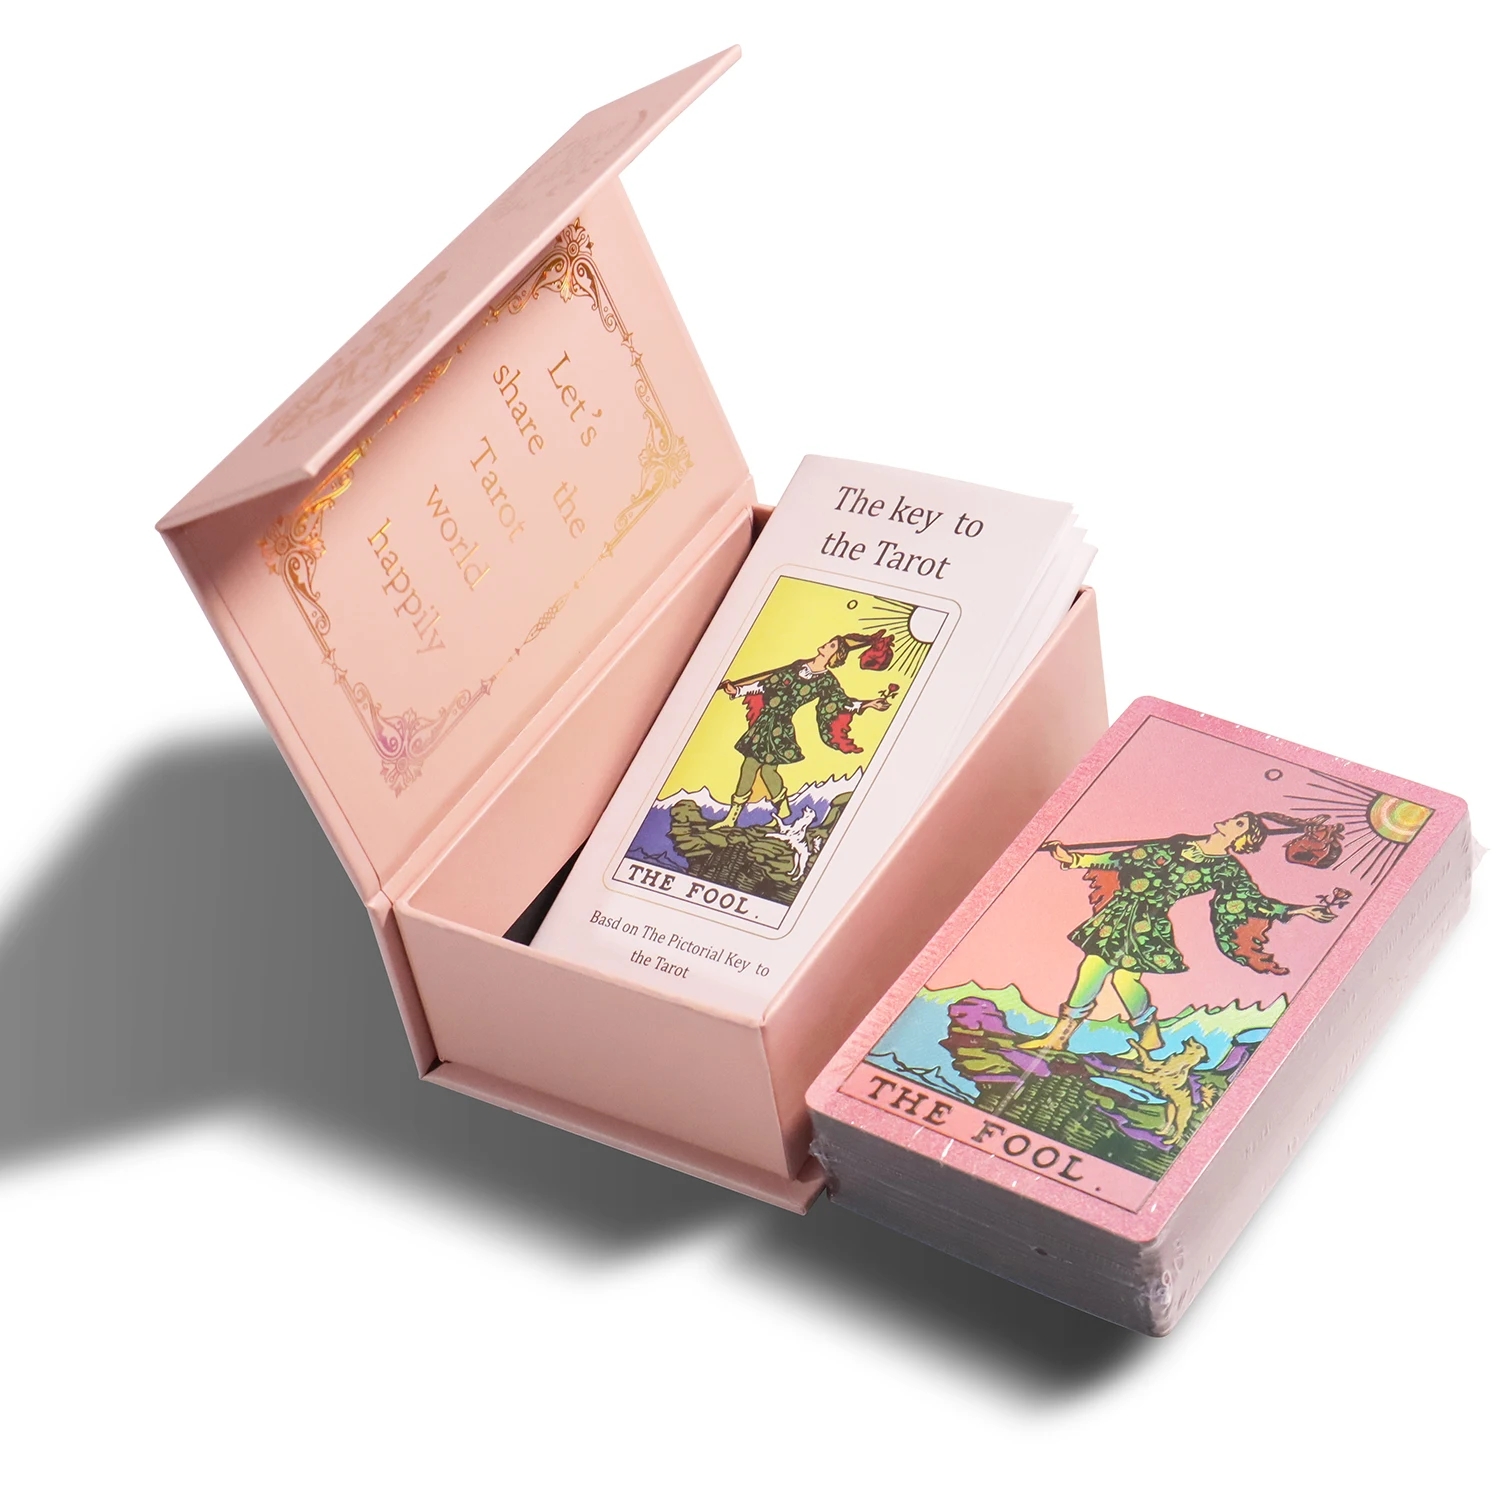 Splendid Pink Classic Design Luxury Tarot Deck Durable Waterproof Holographic Tarot Deck for Beginner and Experts with Guidebook golden borderless upgraded tarot suit table game 12 7cm paper guide divination prediction waterproof high end astrology